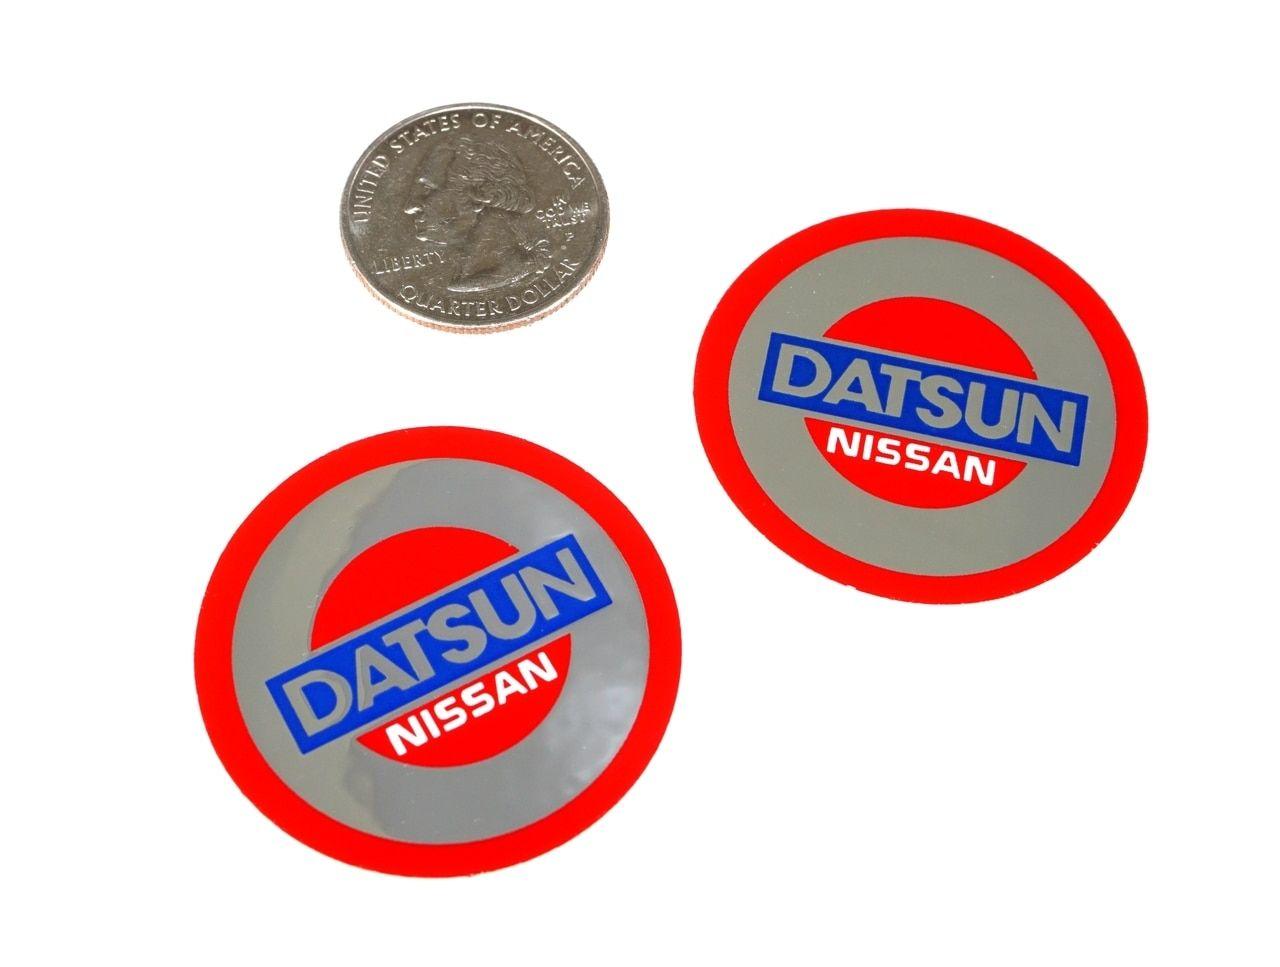 Vintage Datsun Logo - Vintage style decals, printed on mirror-silver, for Datsun Enthusiasts